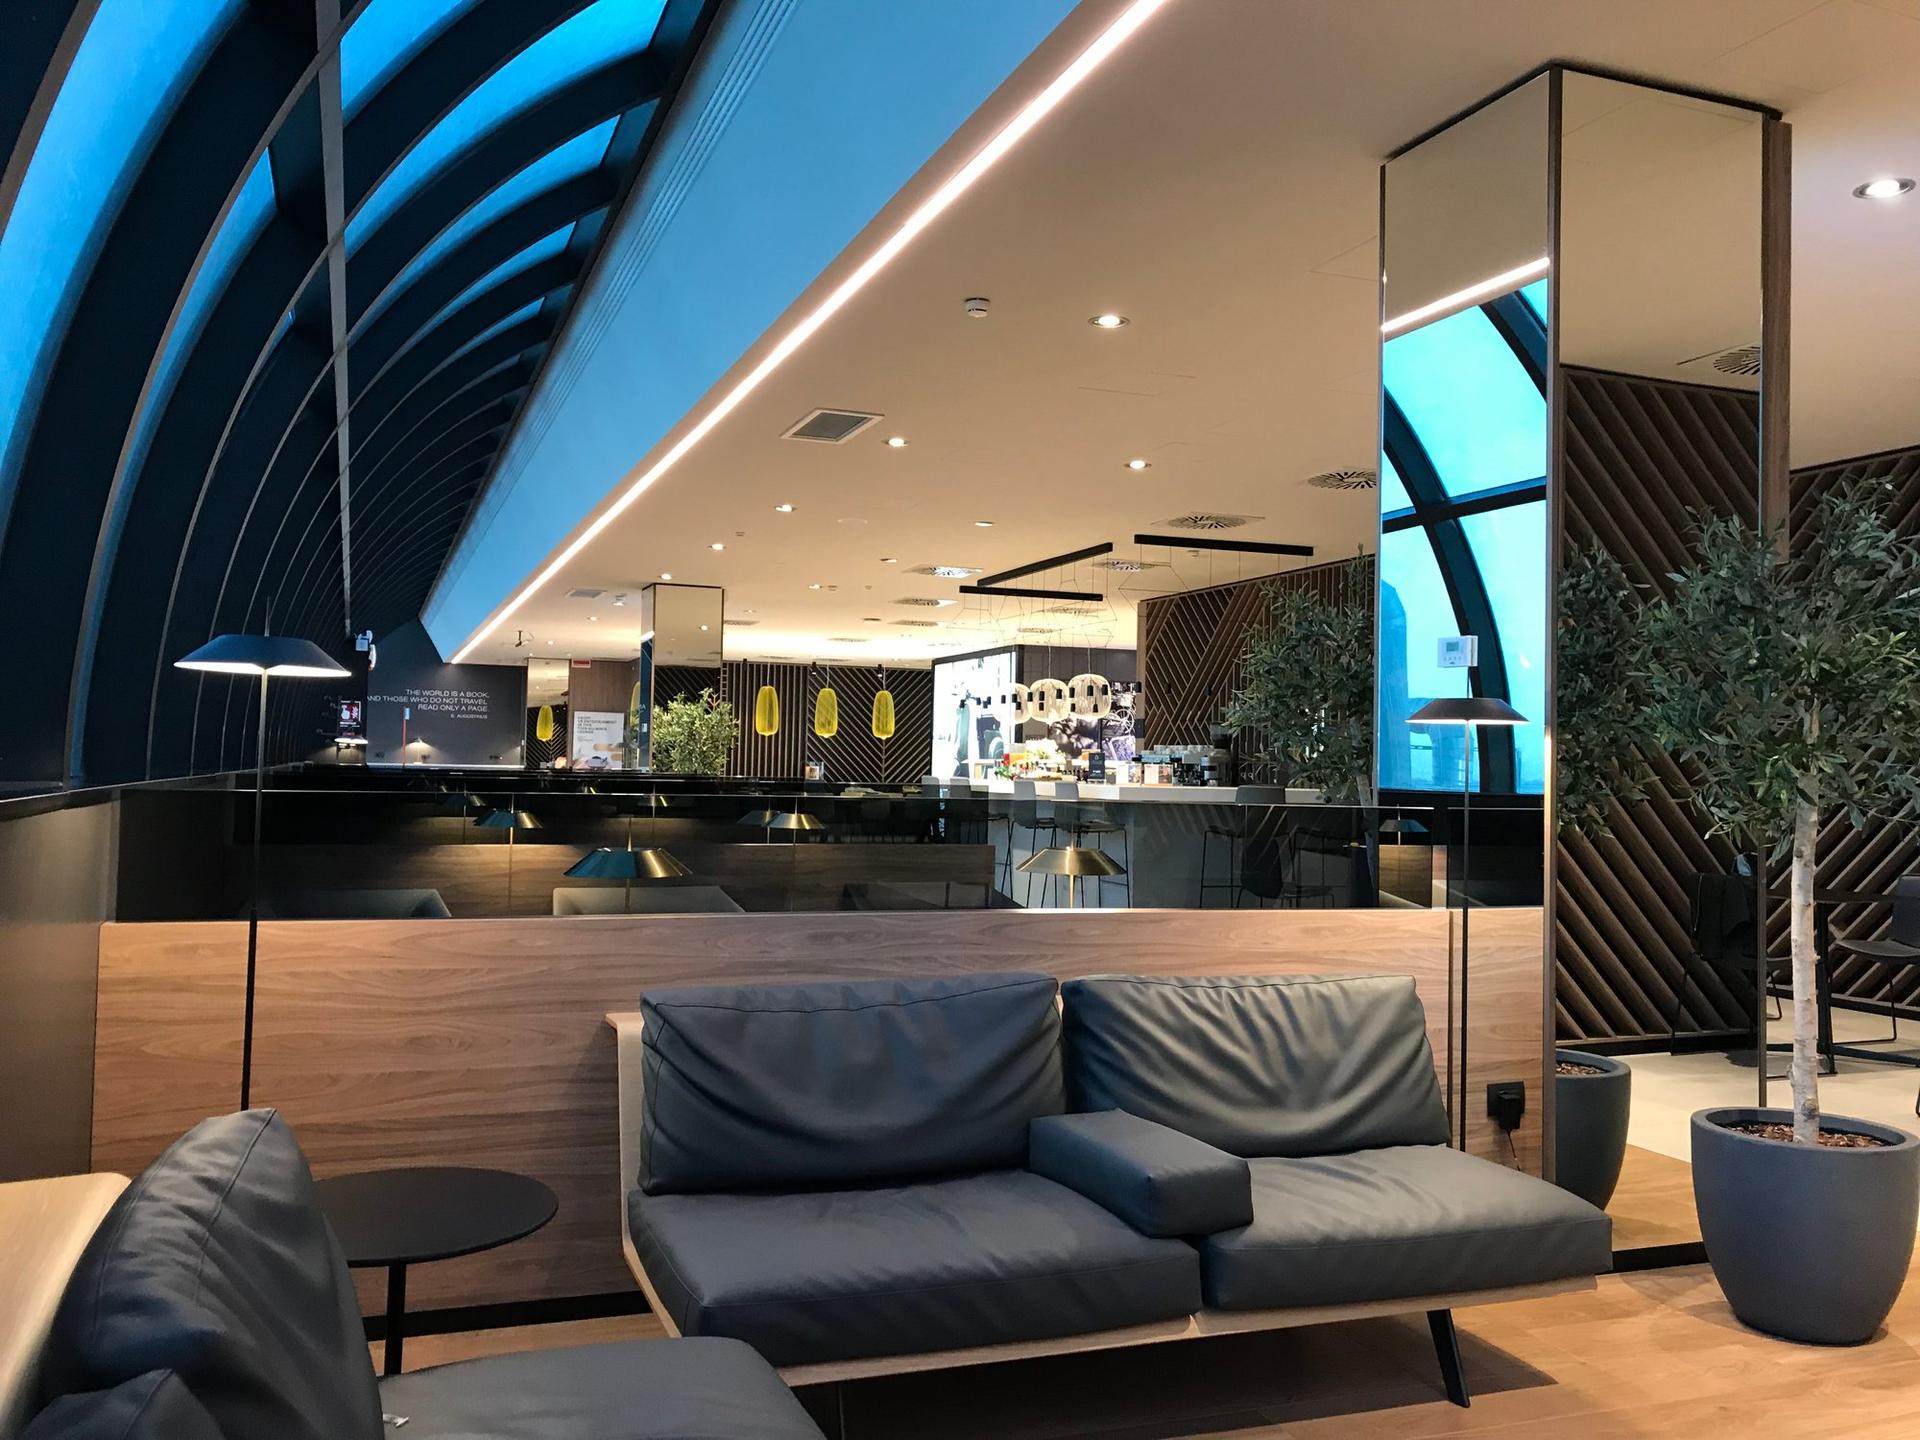 Star Alliance Lounge Rome image 2 of 2